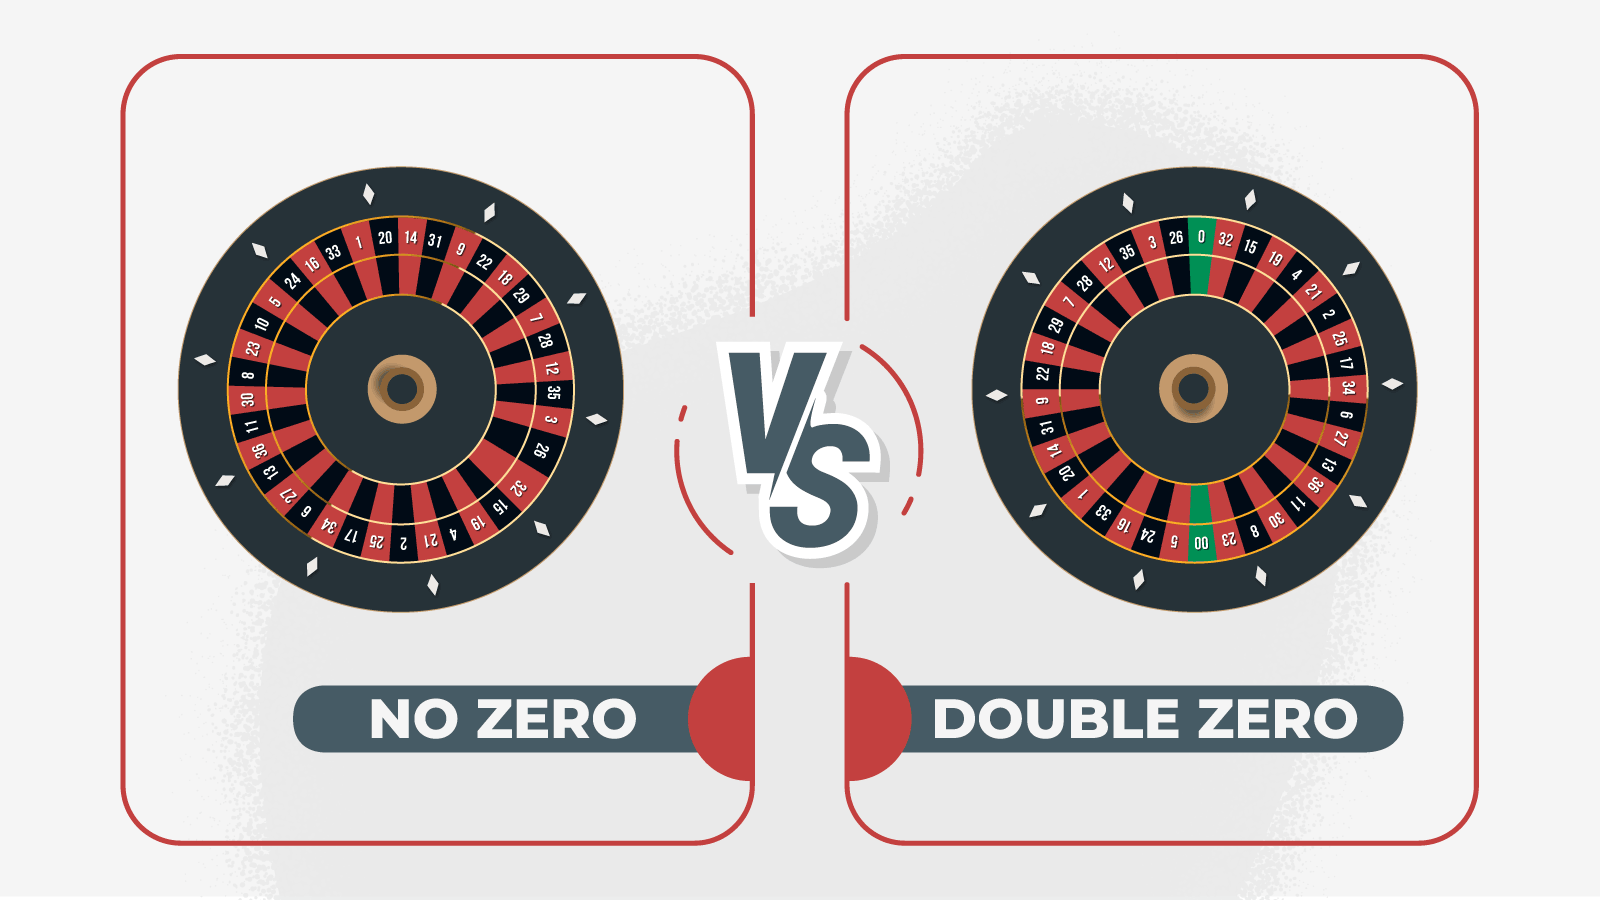 Difference Between Classic And Double Zero Roulette